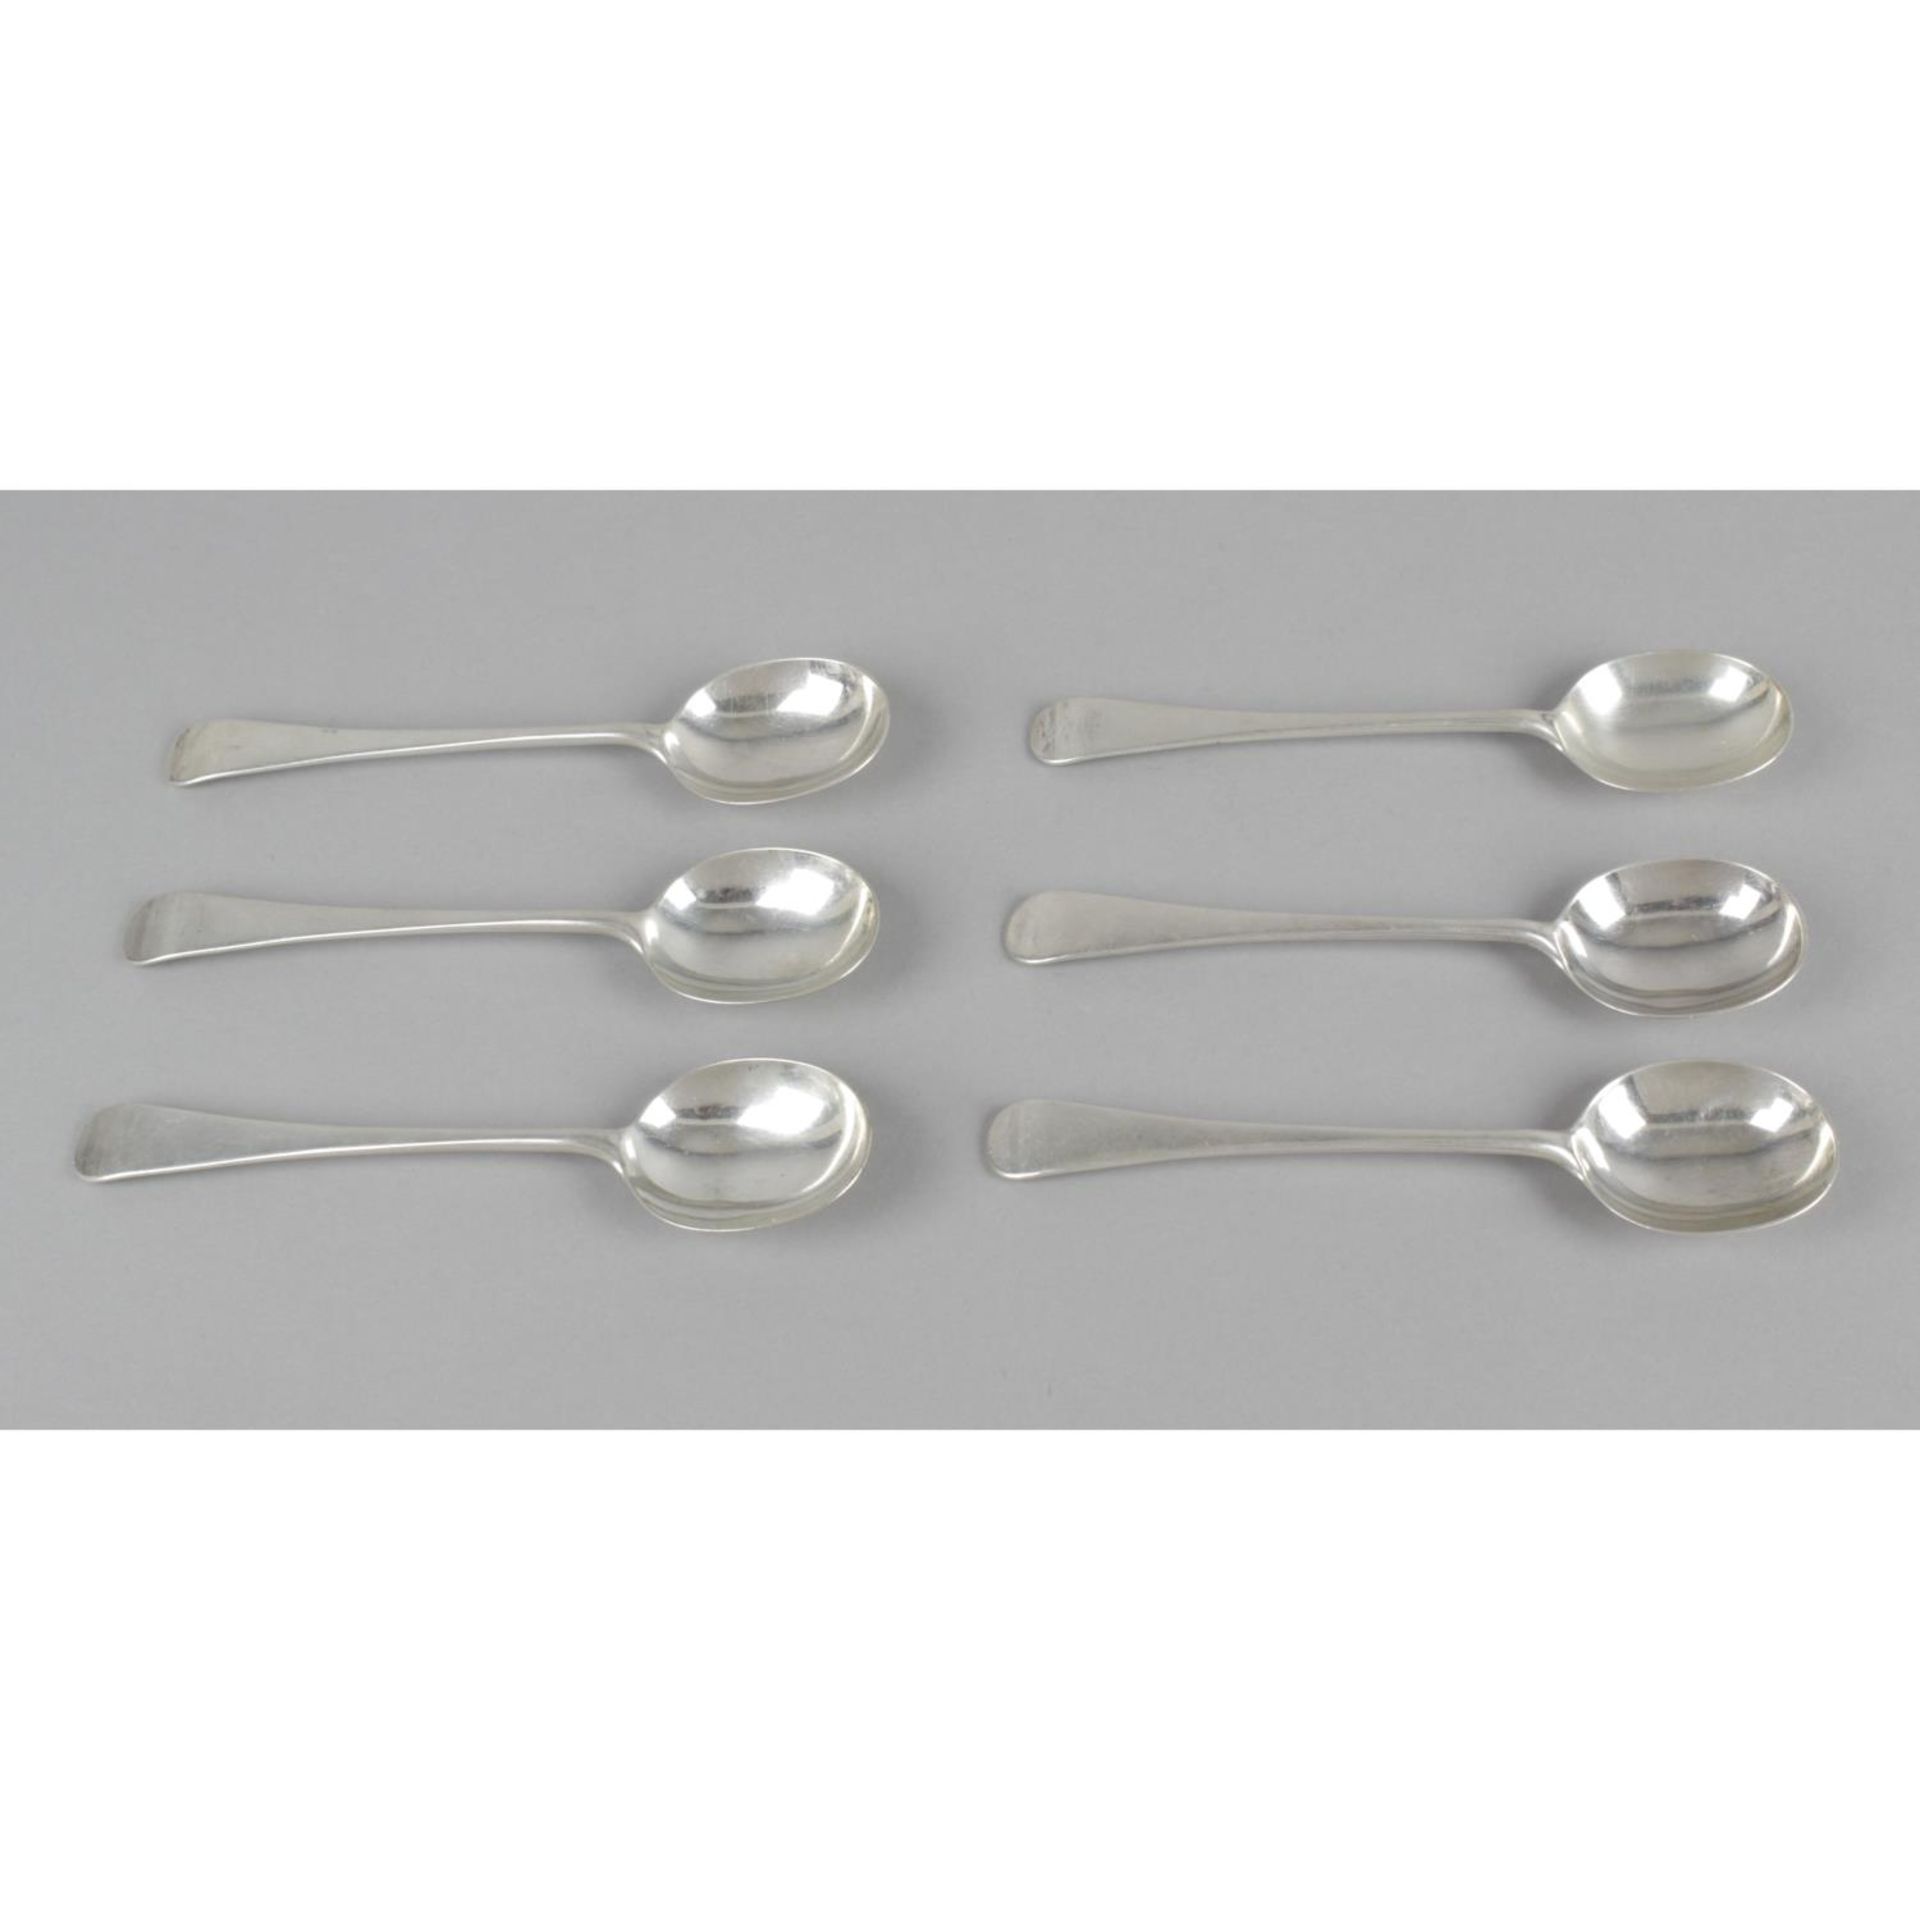 A selection of Old English pattern silver spoons, - Image 4 of 5